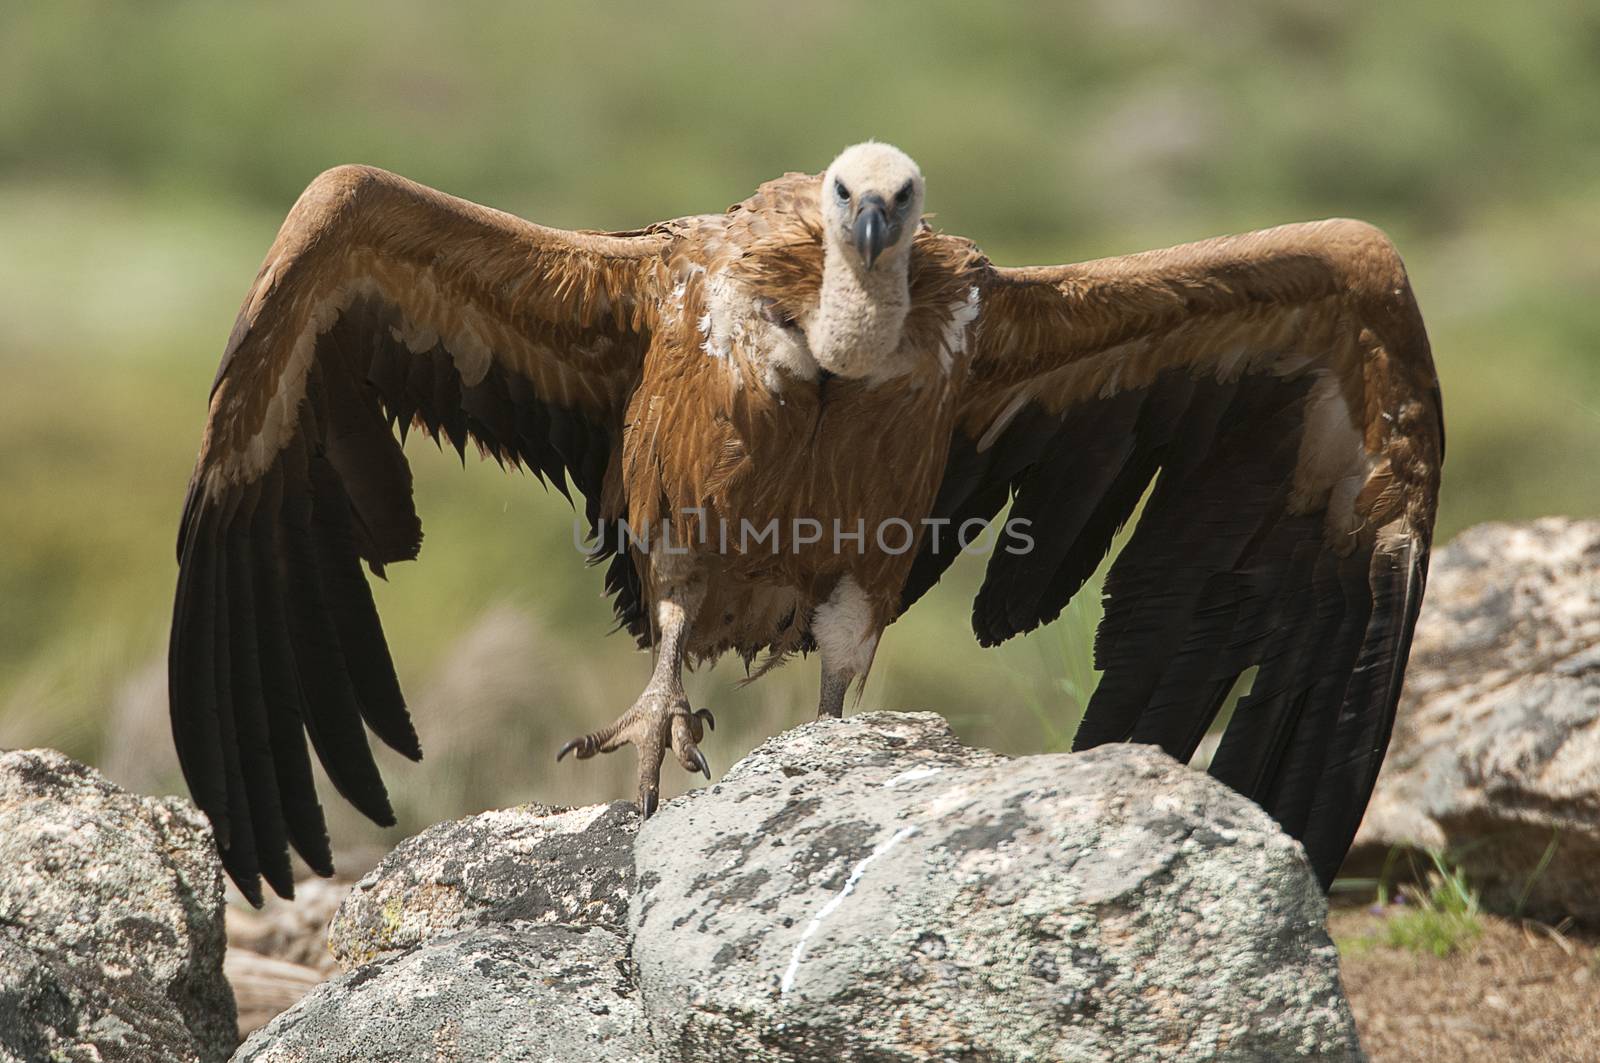 Griffon Vulture (Gyps fulvus) with open wings, flying scavenger  by jalonsohu@gmail.com